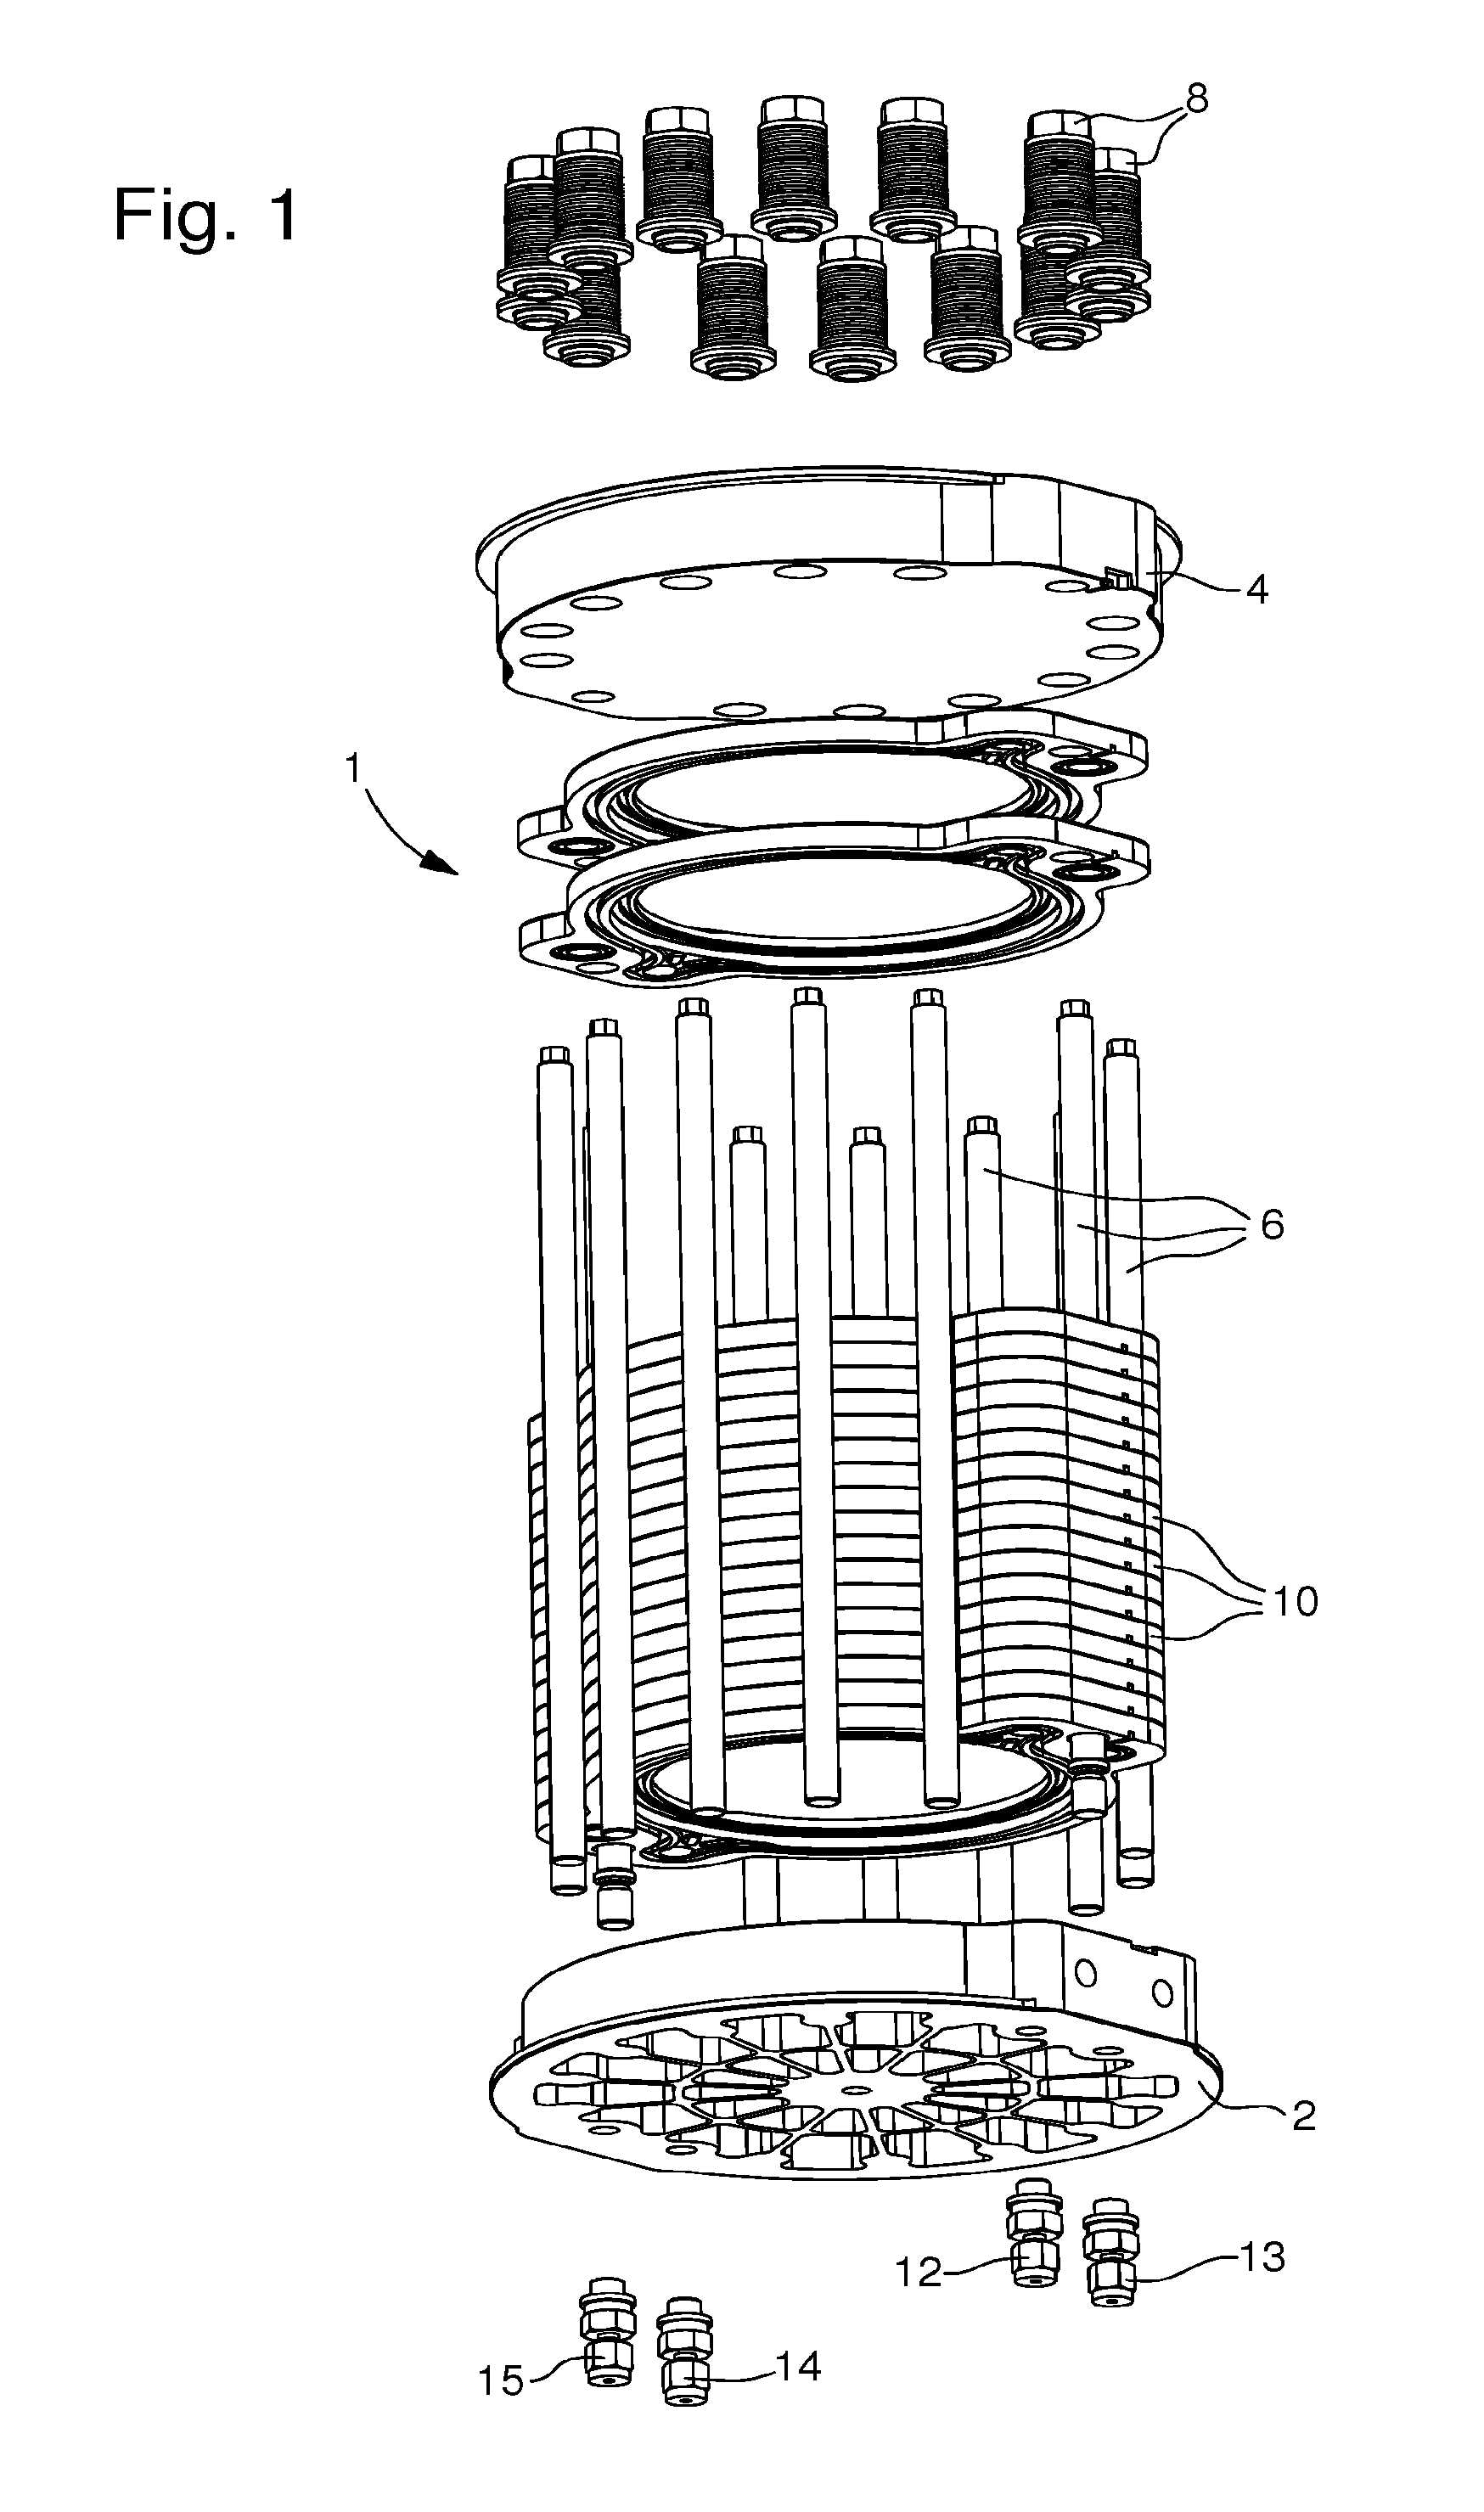 Electrochemical stack device